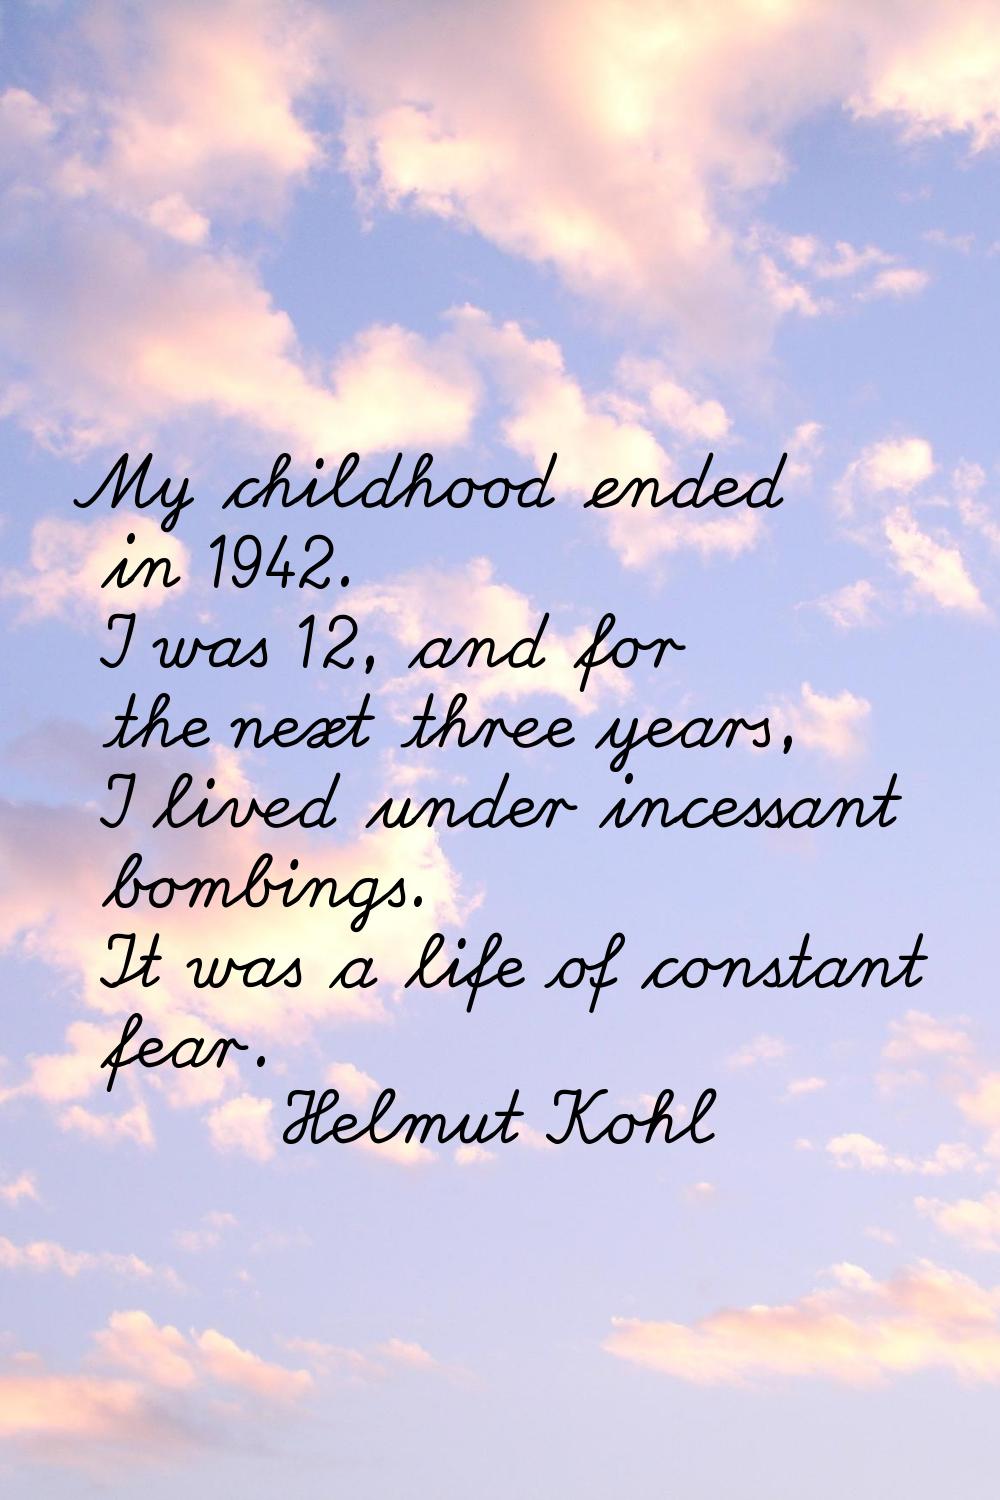 My childhood ended in 1942. I was 12, and for the next three years, I lived under incessant bombing